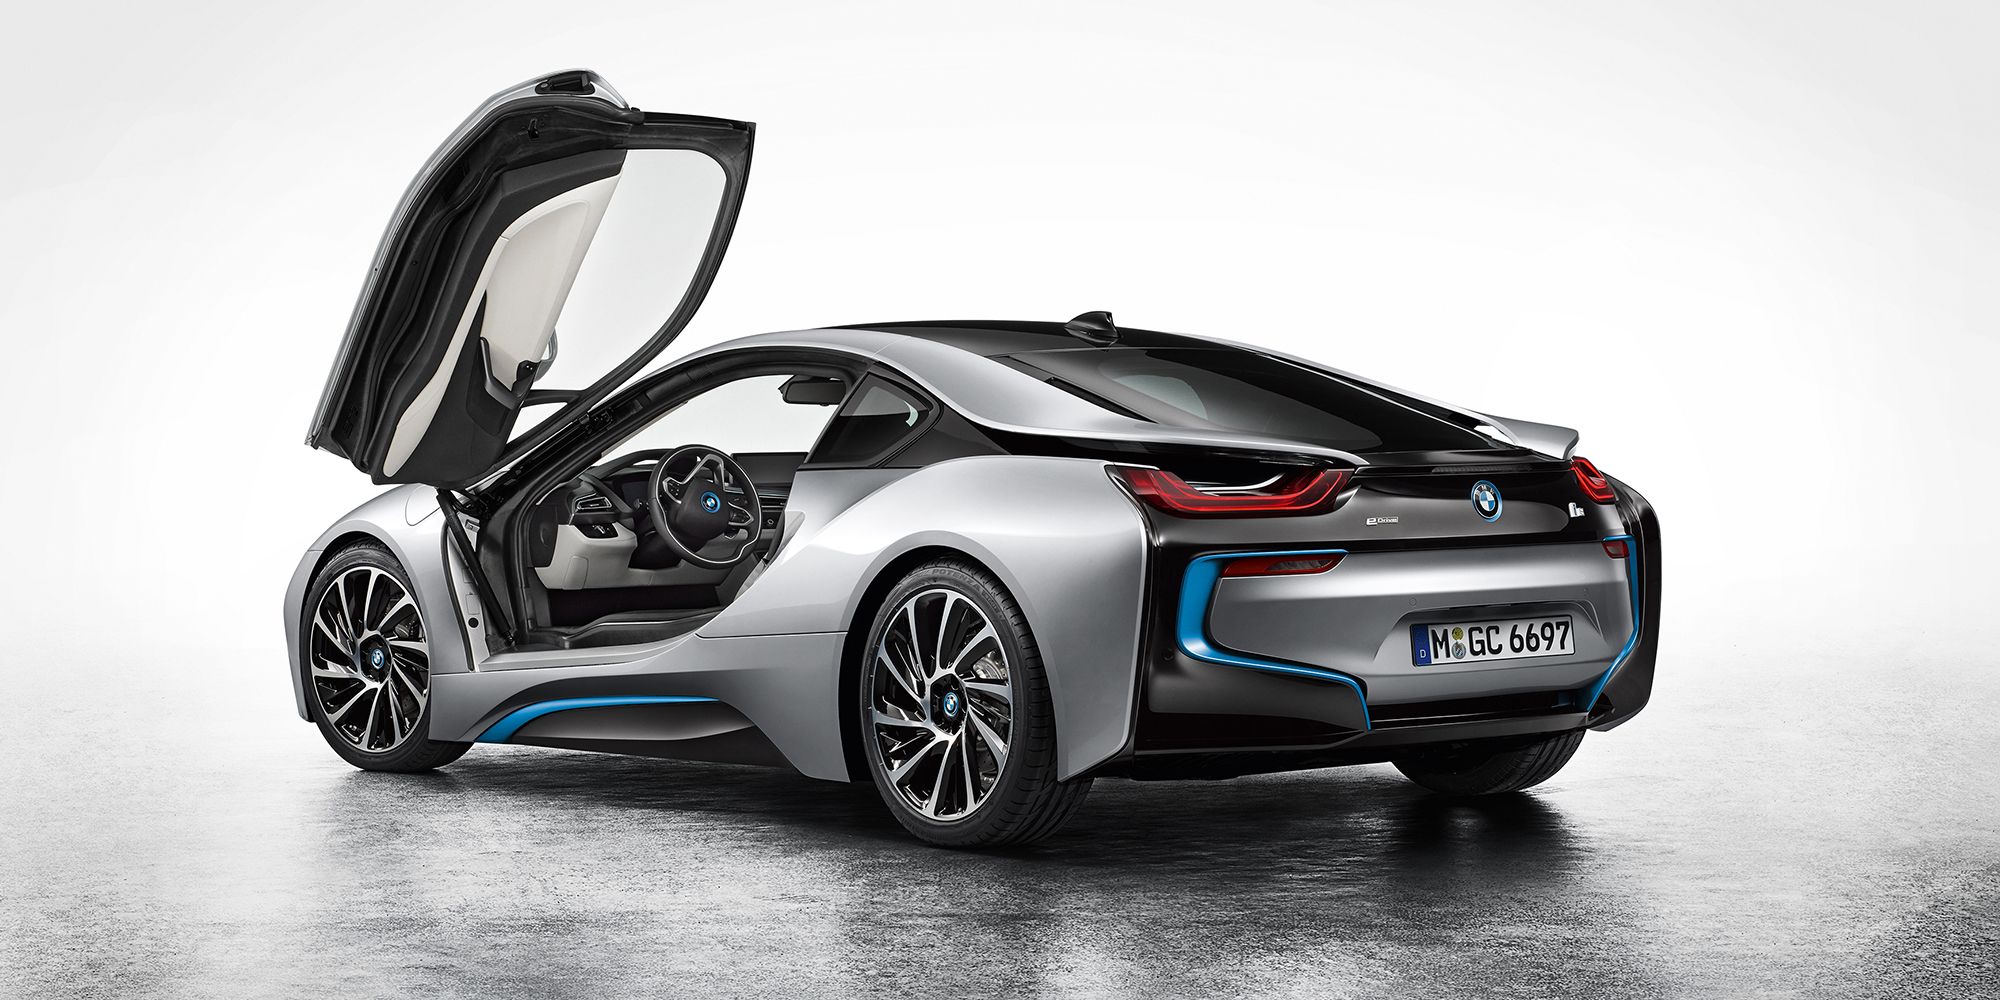 The rear of the BMW i8, door up